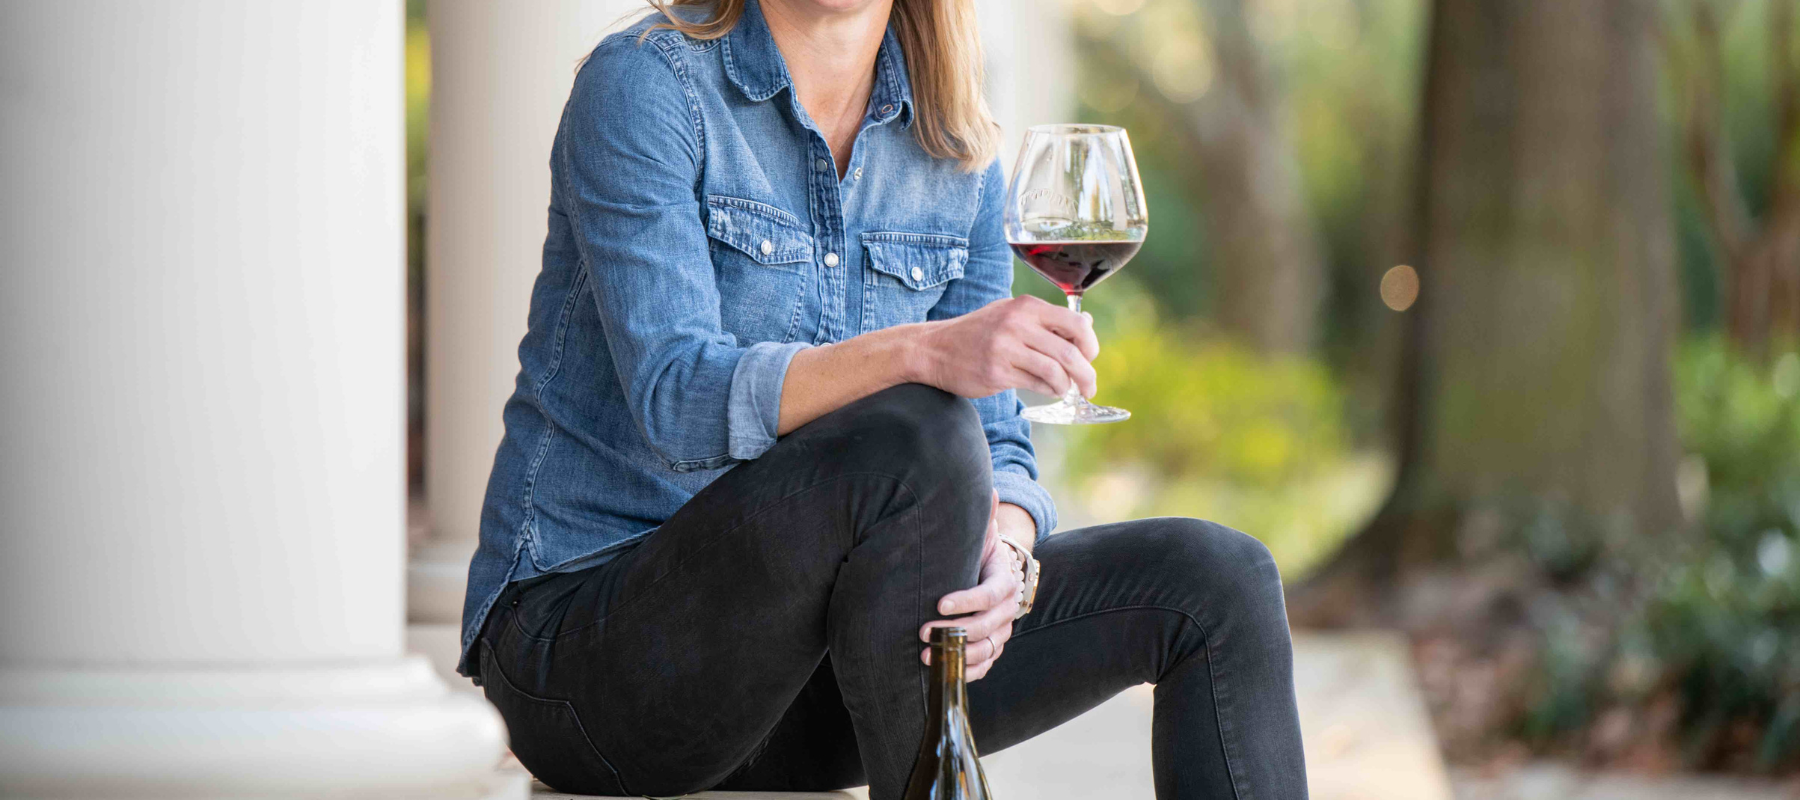 A woman holds a glass of red wine